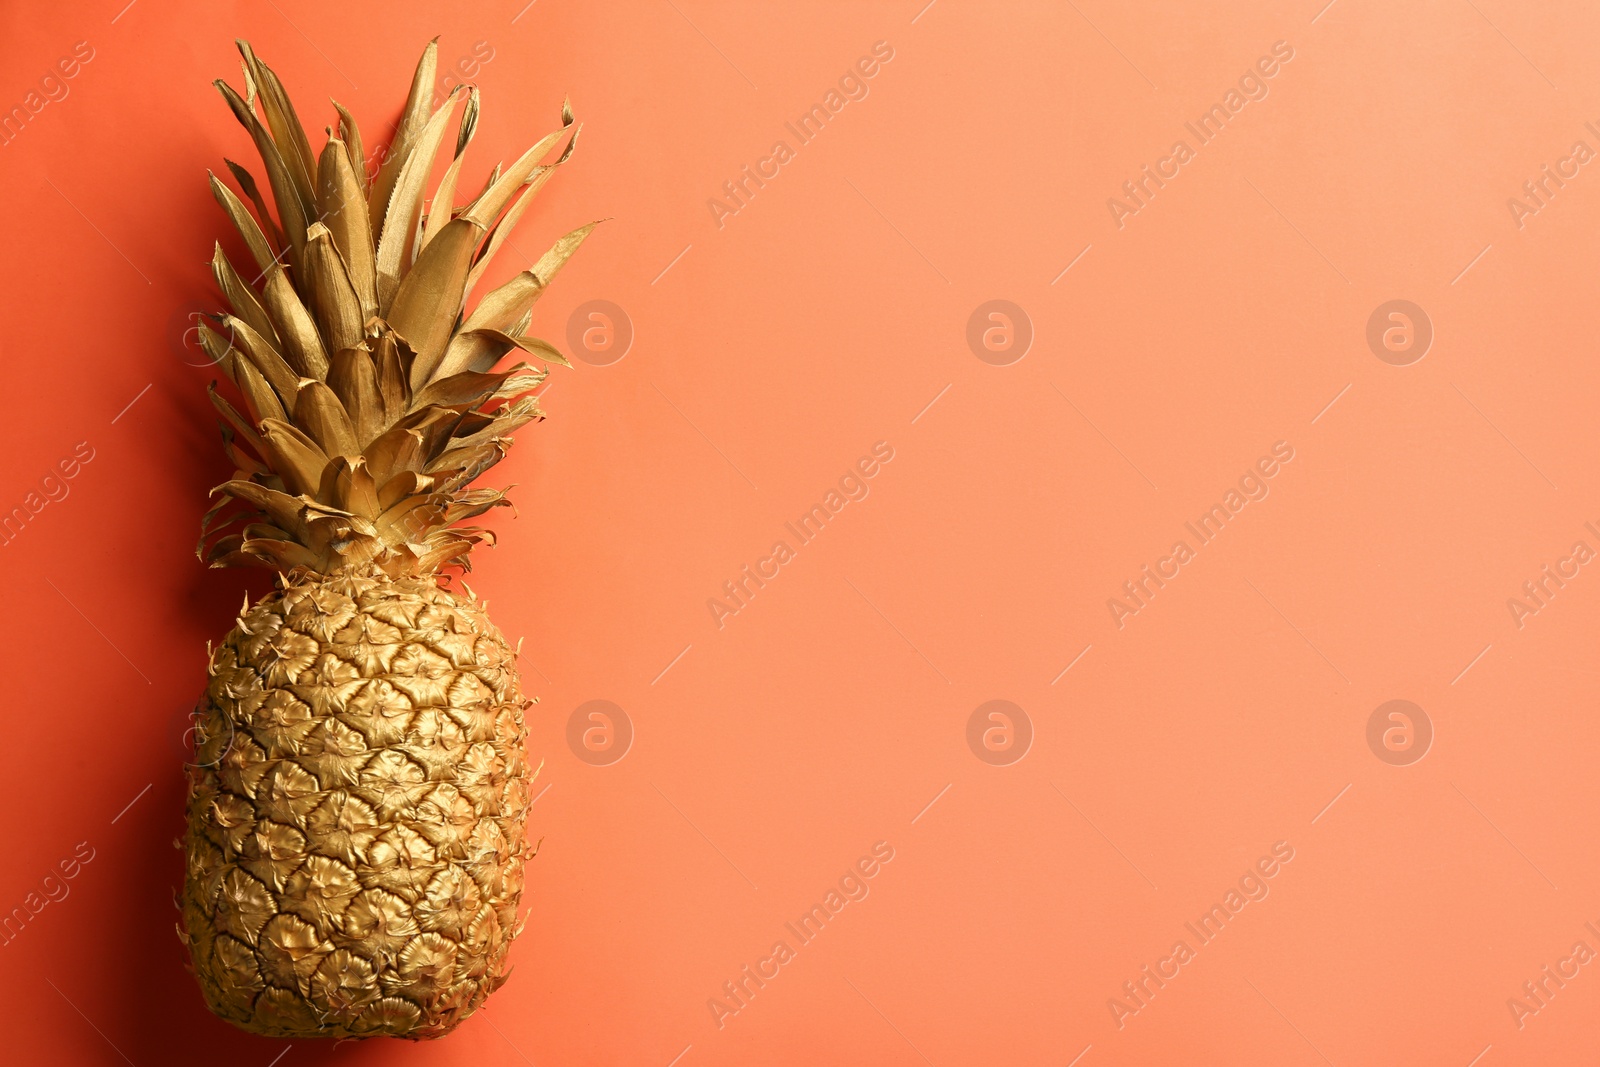 Photo of Golden pineapple on orange background, top view with space for text. Creative concept